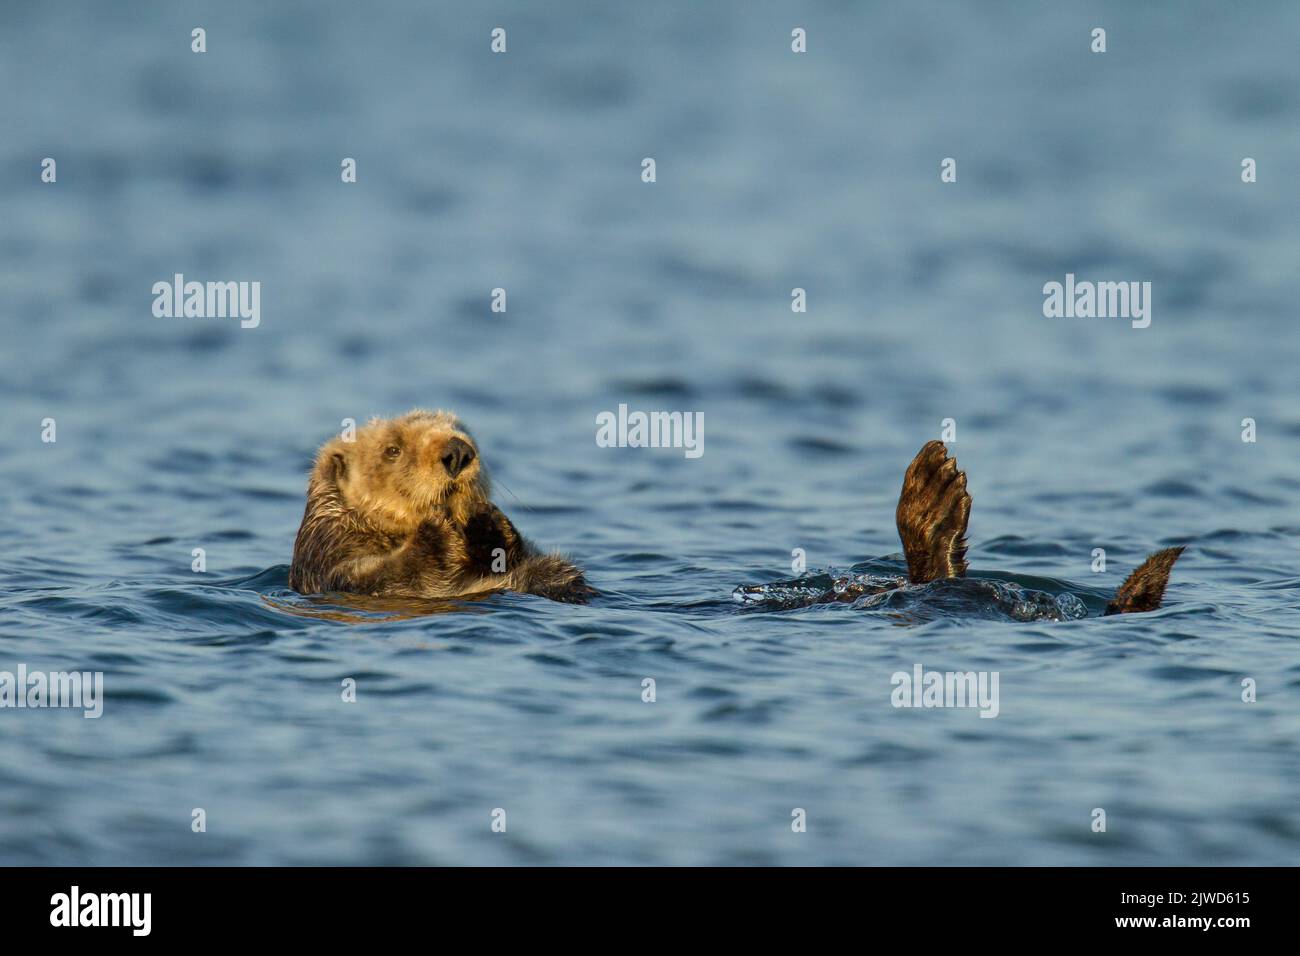 California Sea otter (Enhydra lutris) floating on its back in water Stock Photo